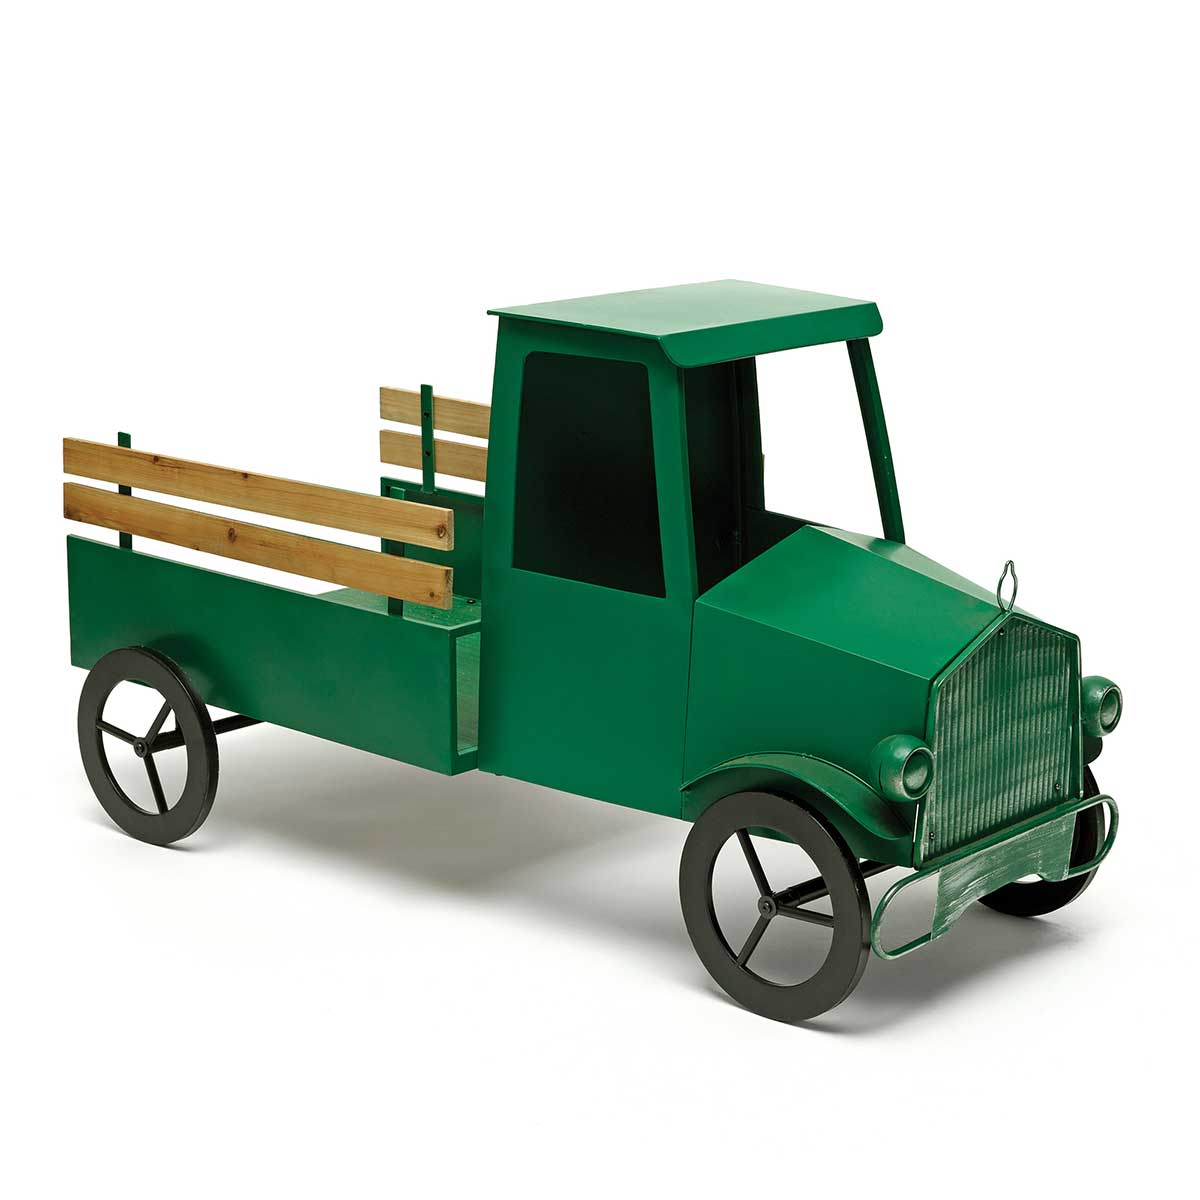 METAL TRUCK GREEN WITH WOOD RAILS AND 4 MOVEACHBLE WHEELS